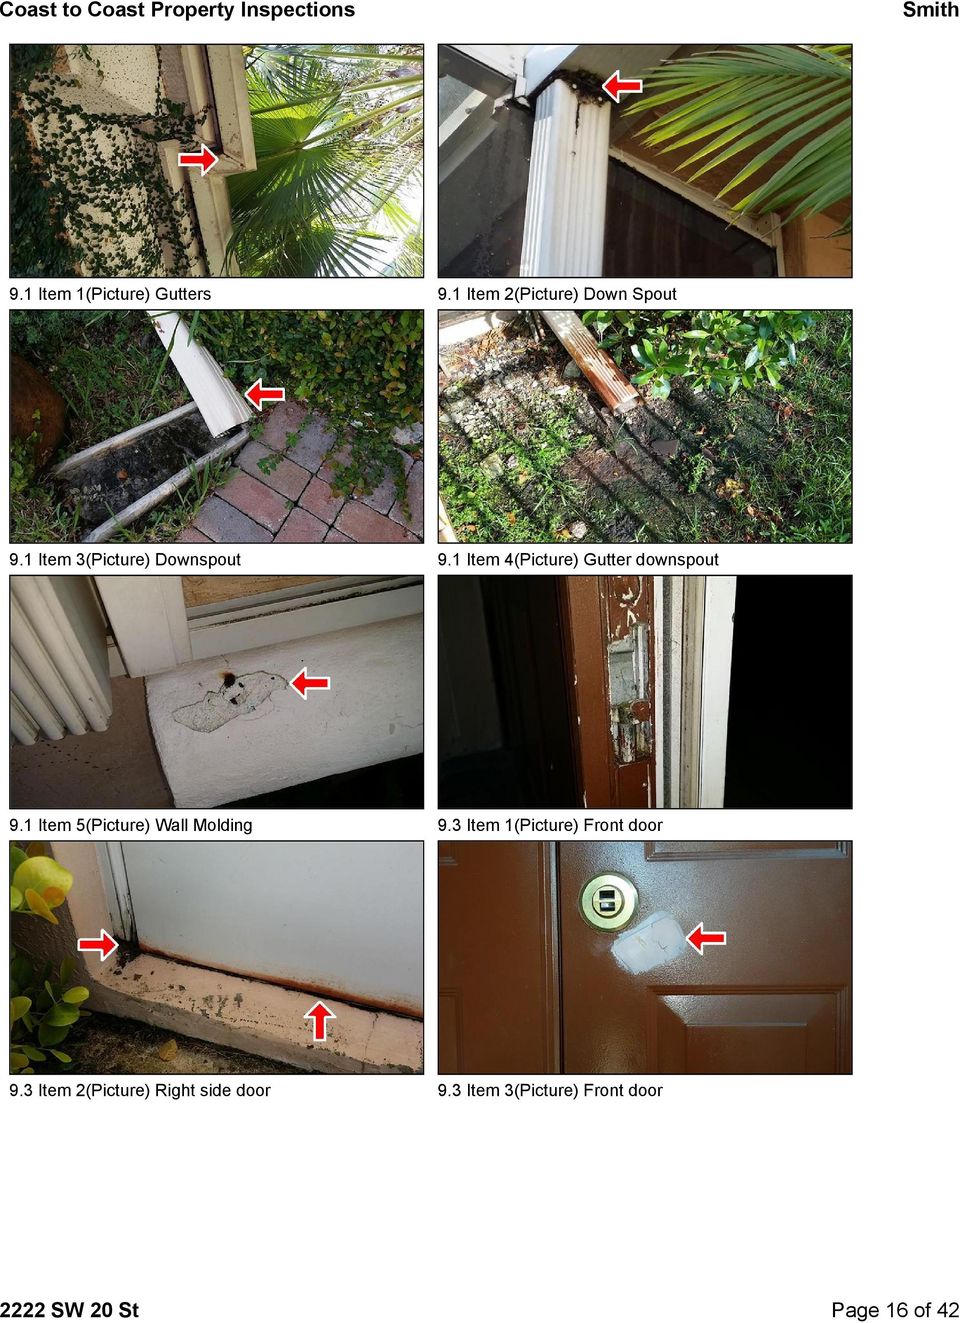 1 Item 5(Picture) Wall Molding 9.3 Item 1(Picture) Front door 9.